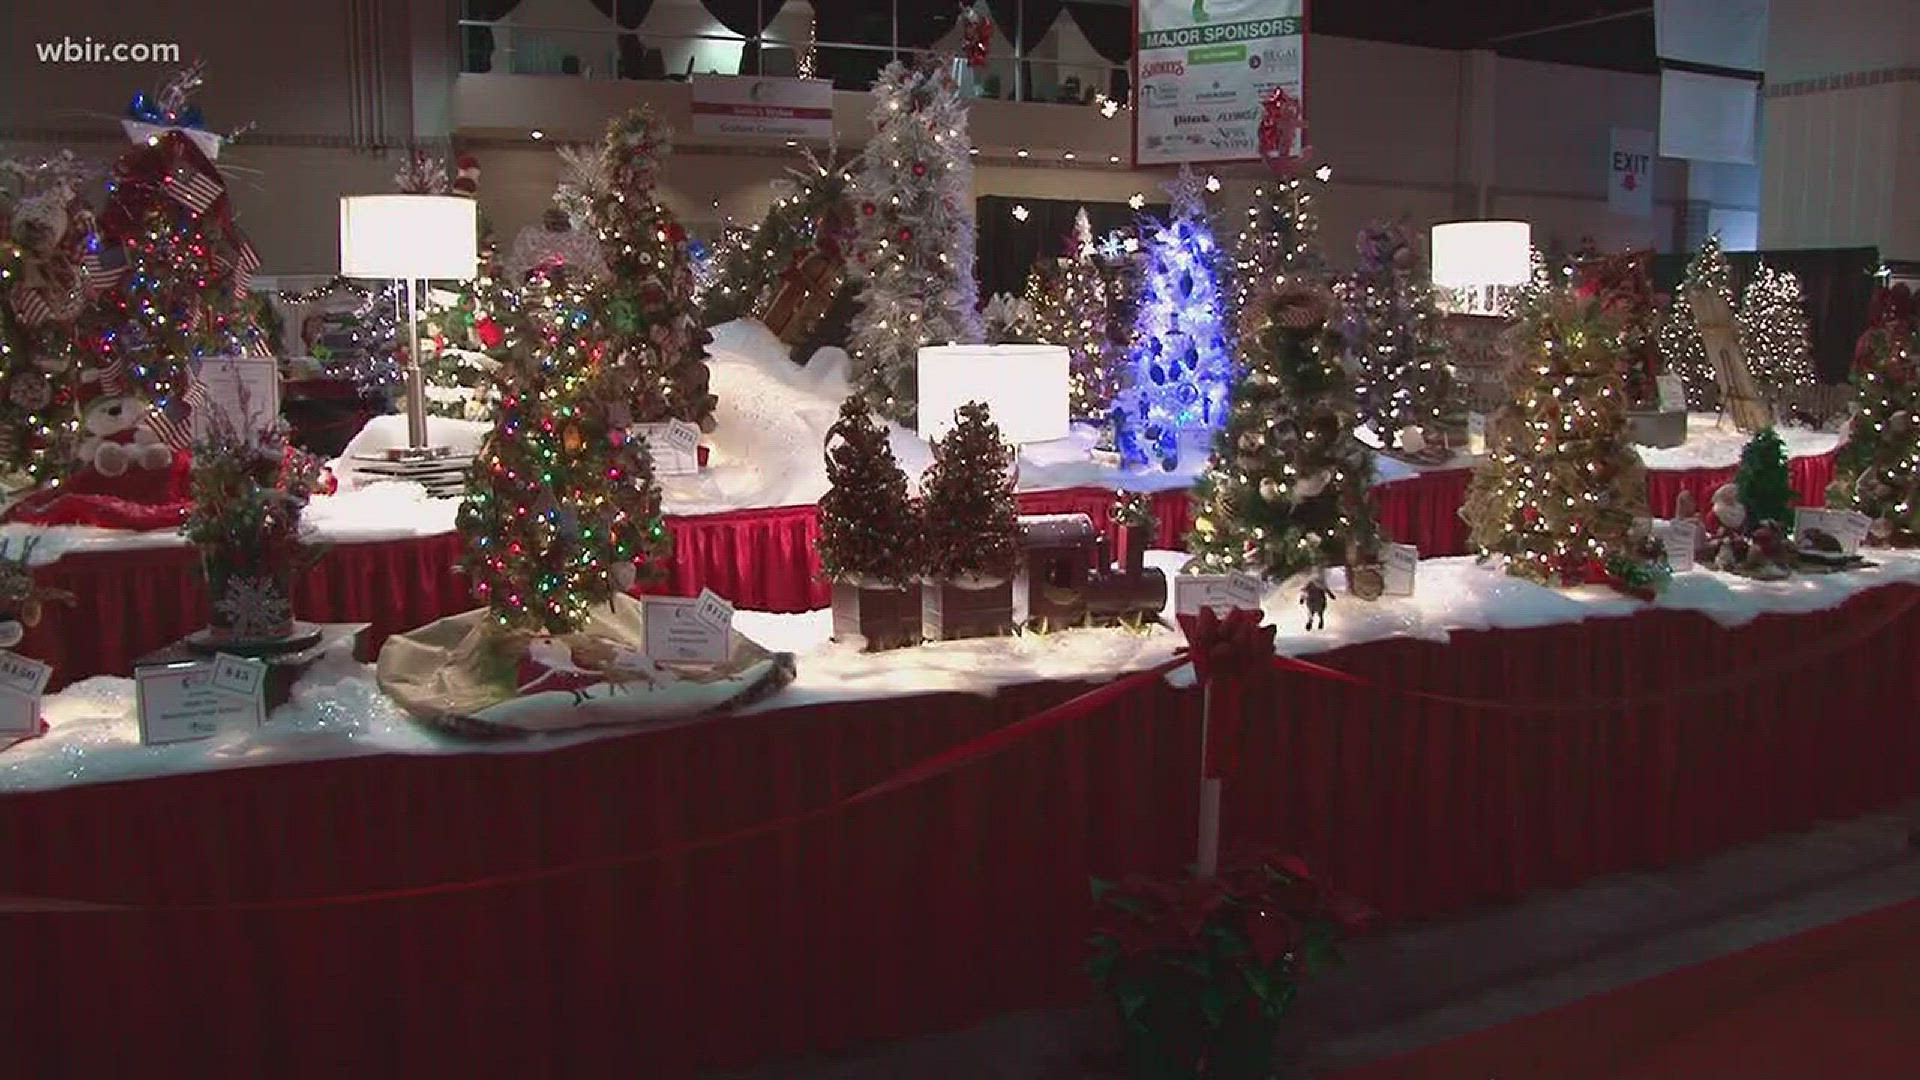 Nov. 21, 2017: Designers are decking the halls for this year's Fantasy of Trees, putting the finishing touches on their decorations.